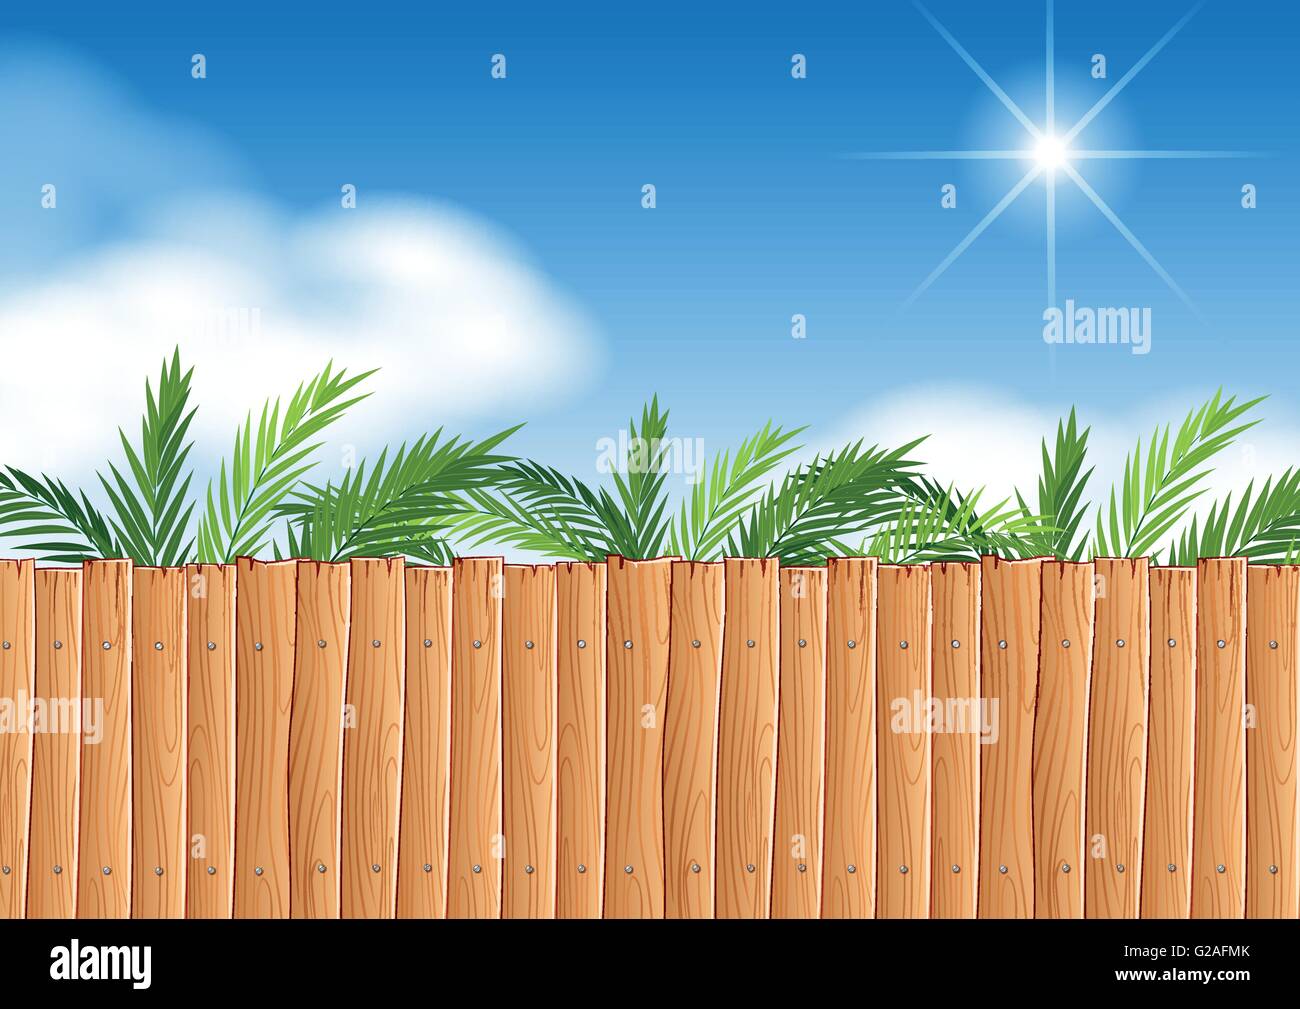 Scene with wooden fence and tree illustration Stock Vector